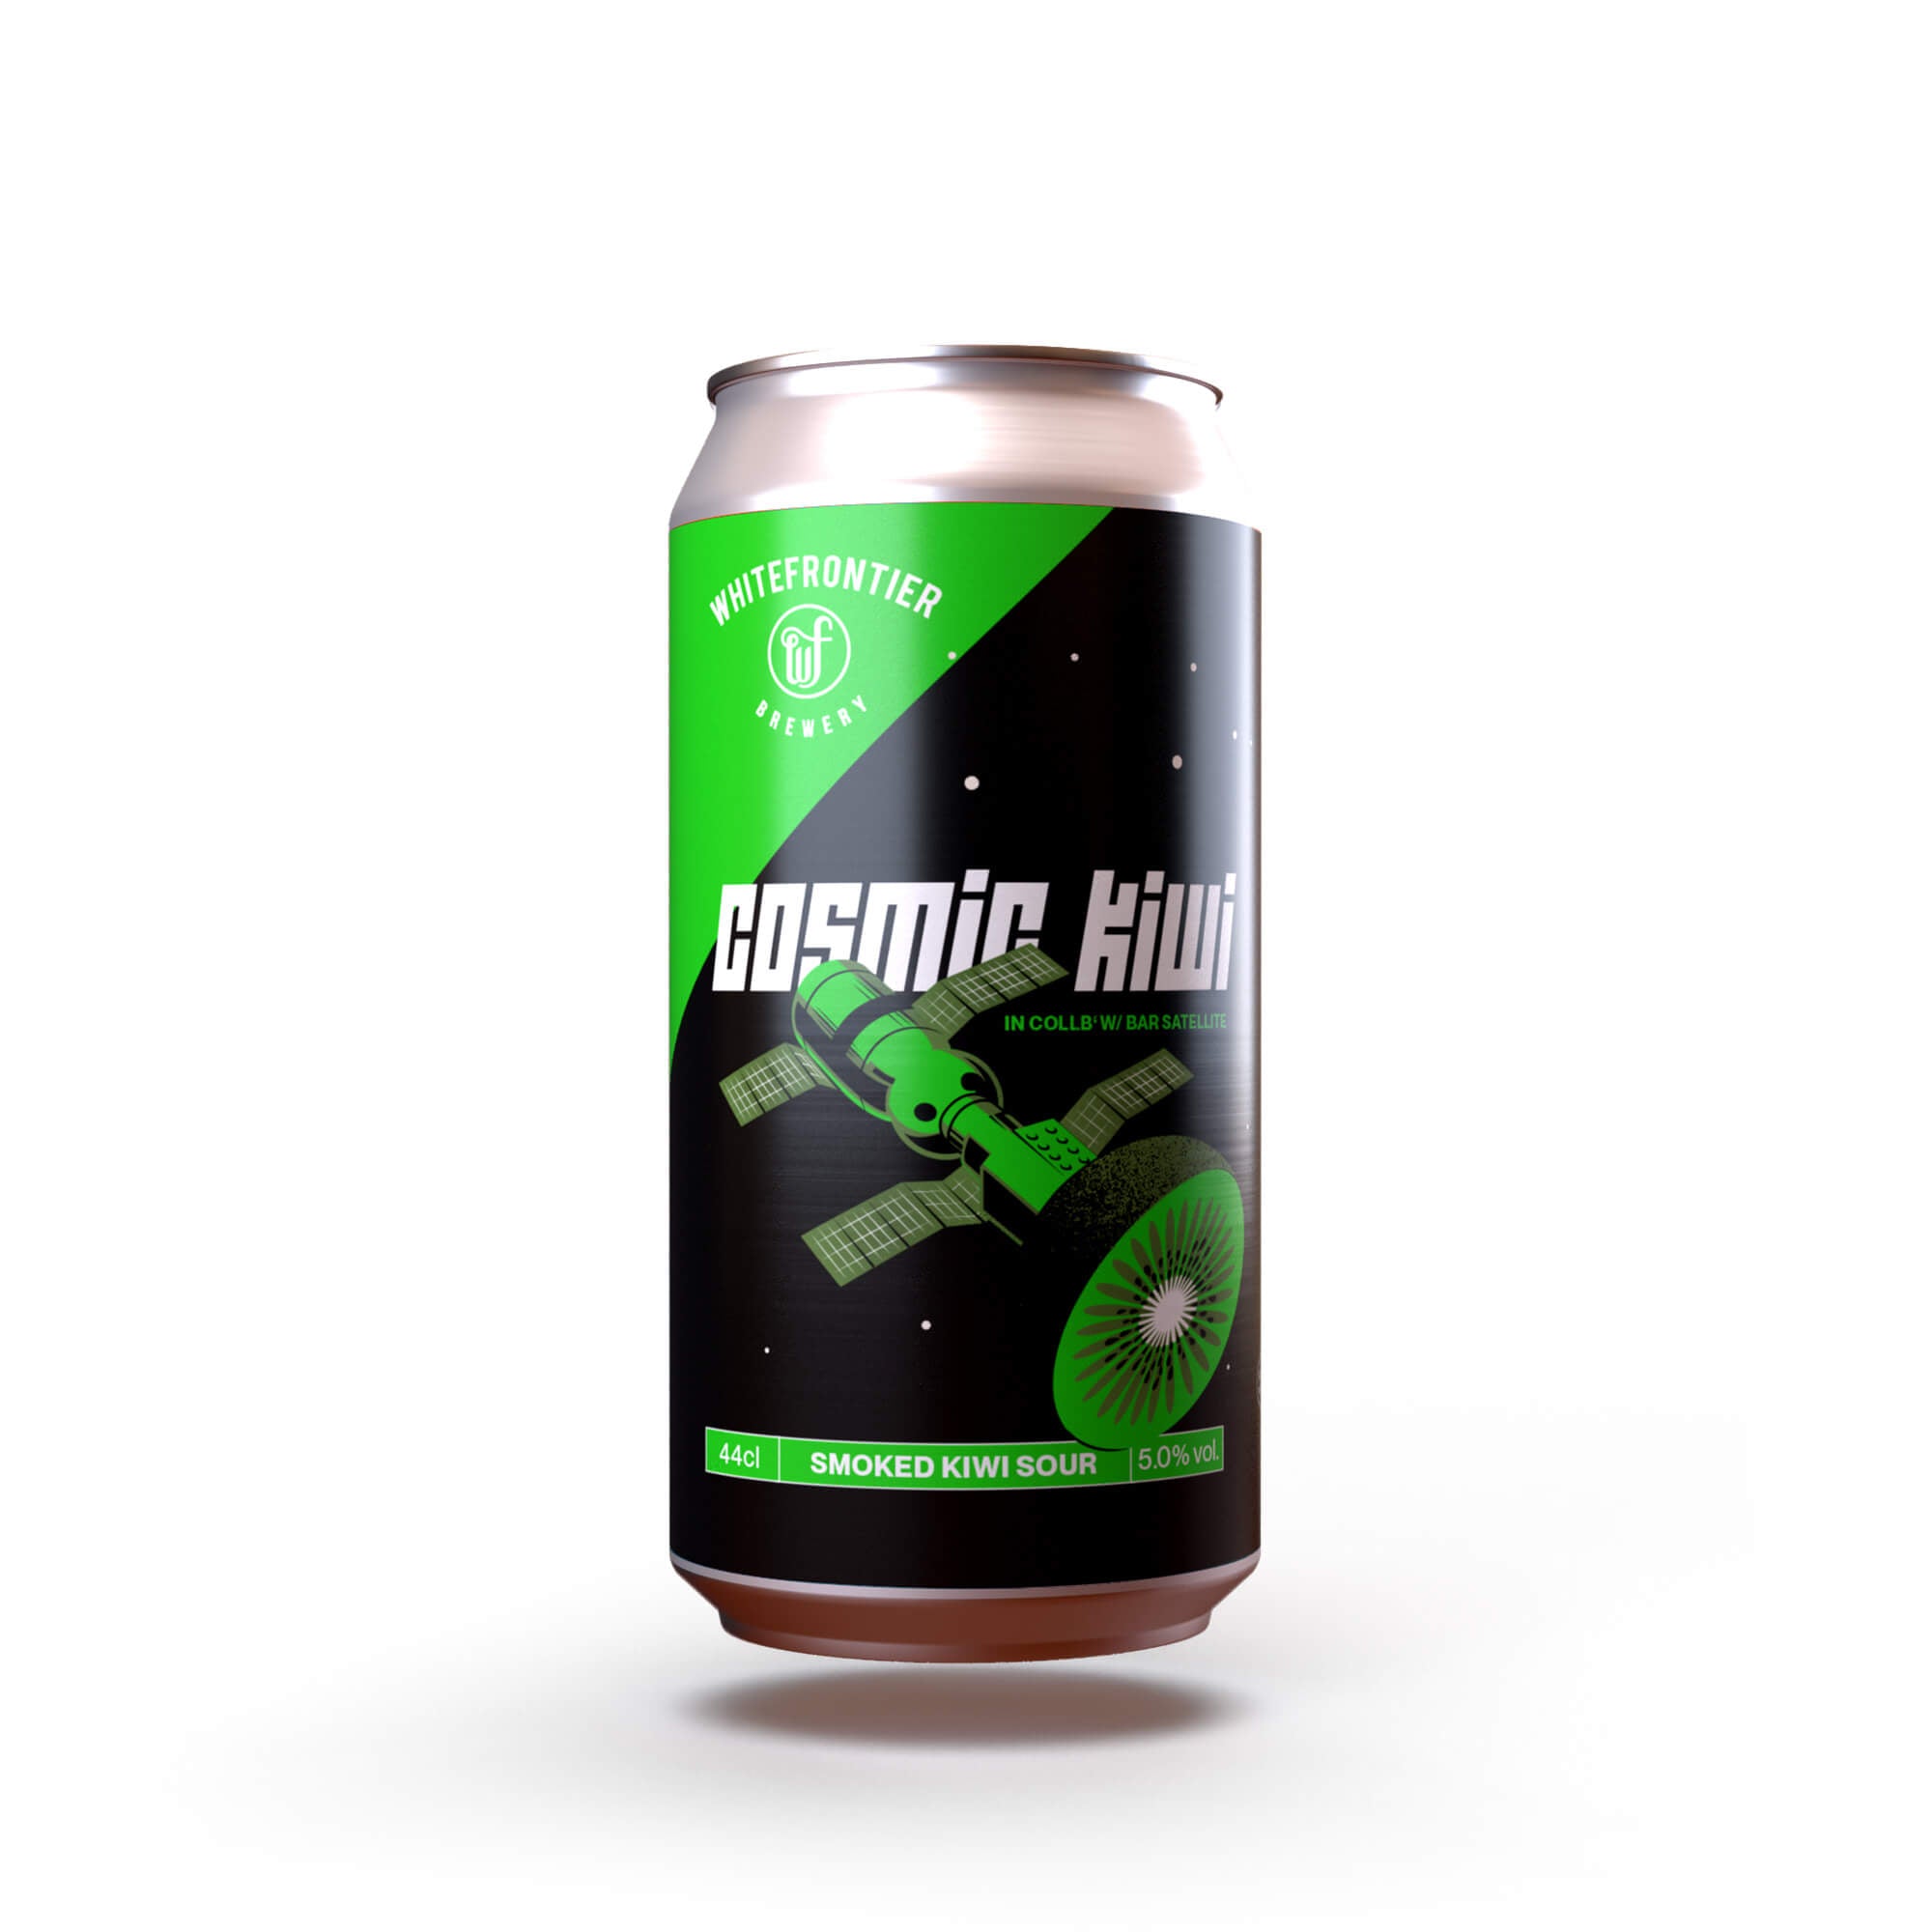 whitefrontier-biere-Cosmic-kiwi-smoked-kiwi-sour-suisse-craft-fly